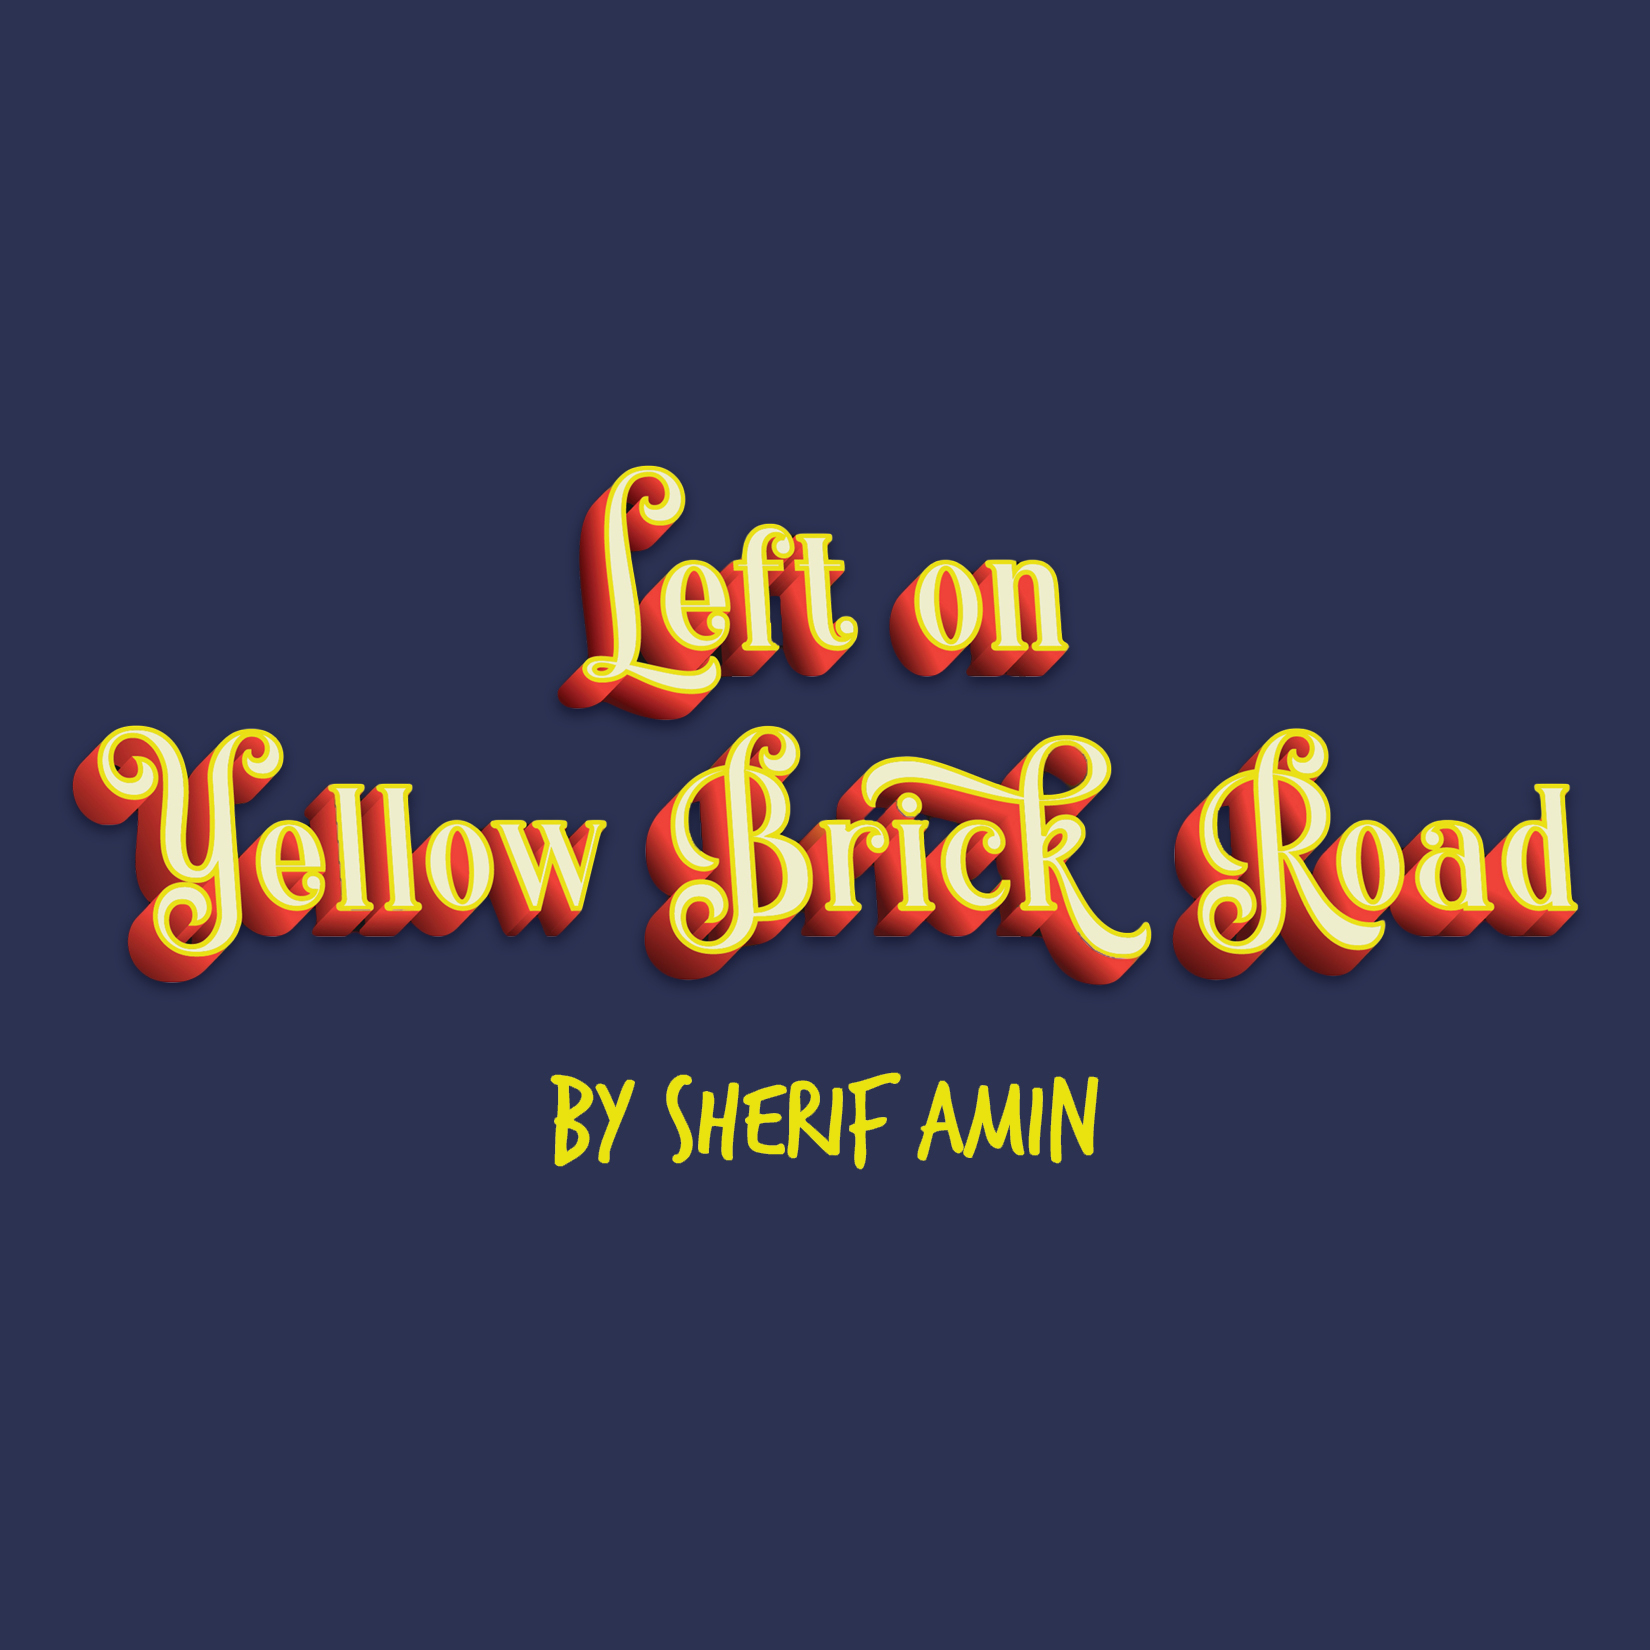 Left on Yellow Brick Road by Sherif Amin